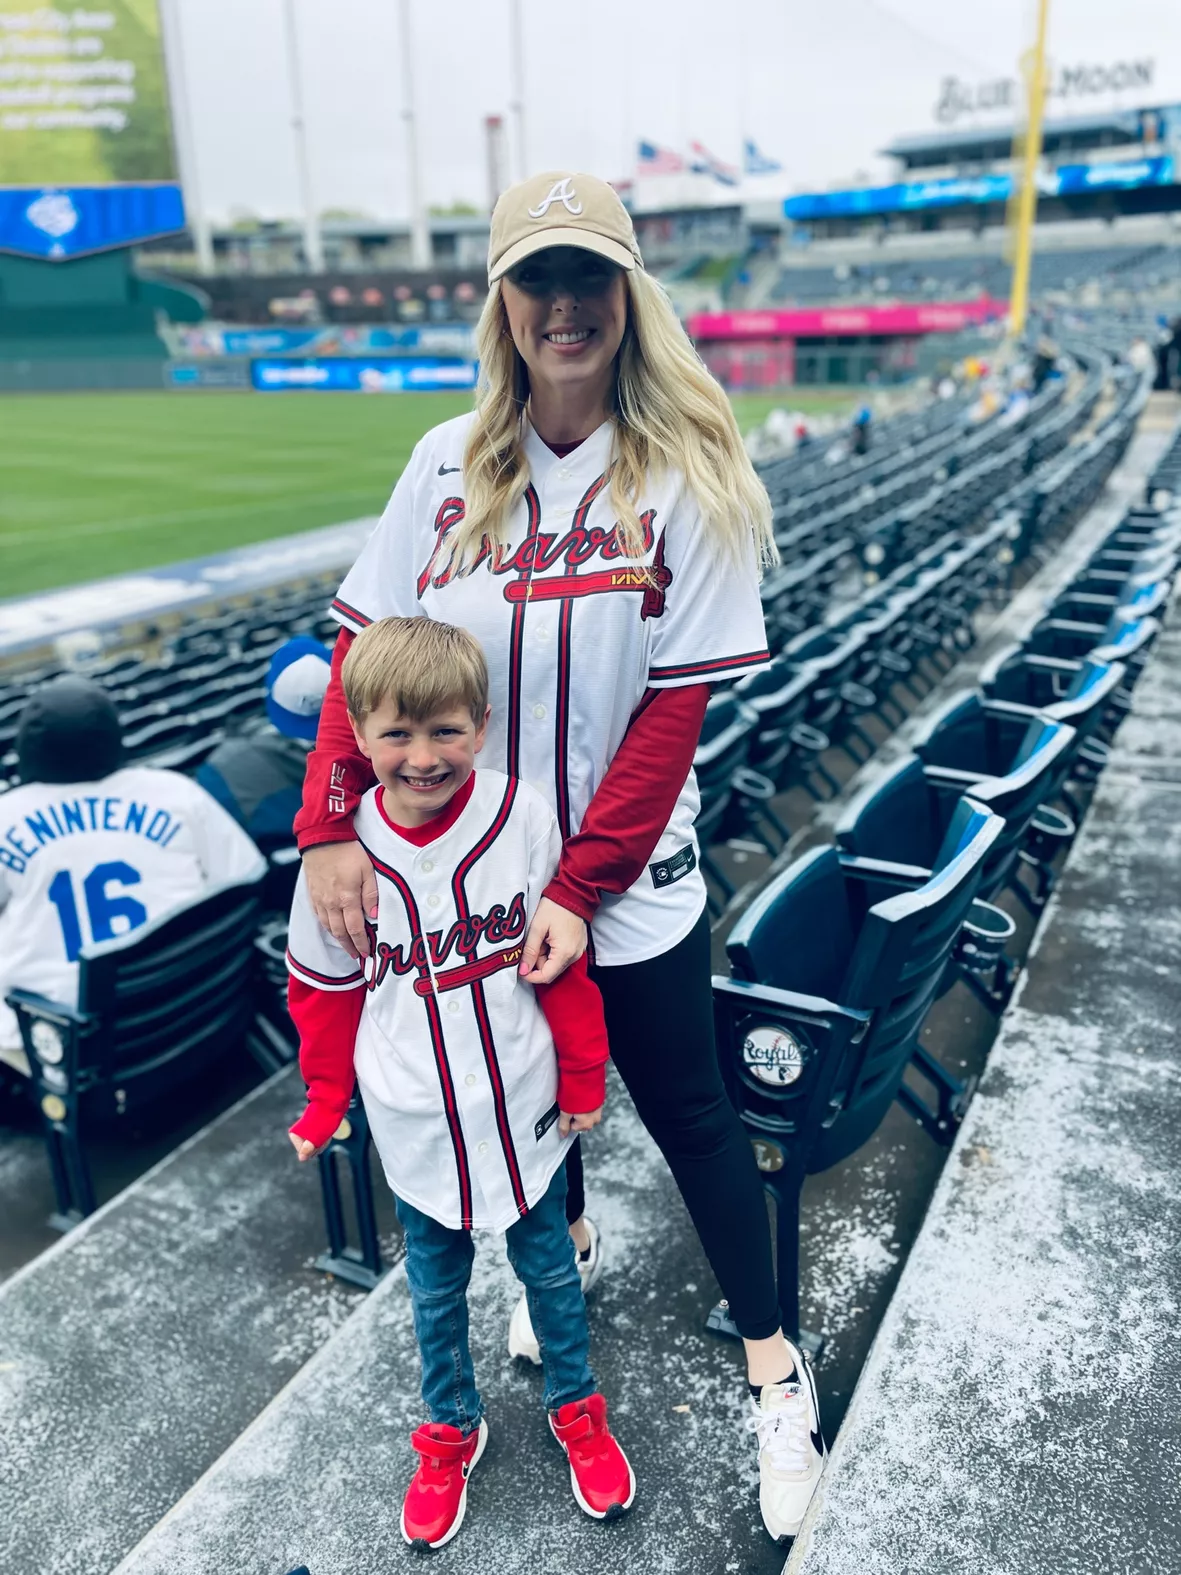 braves ozzie albies jersey